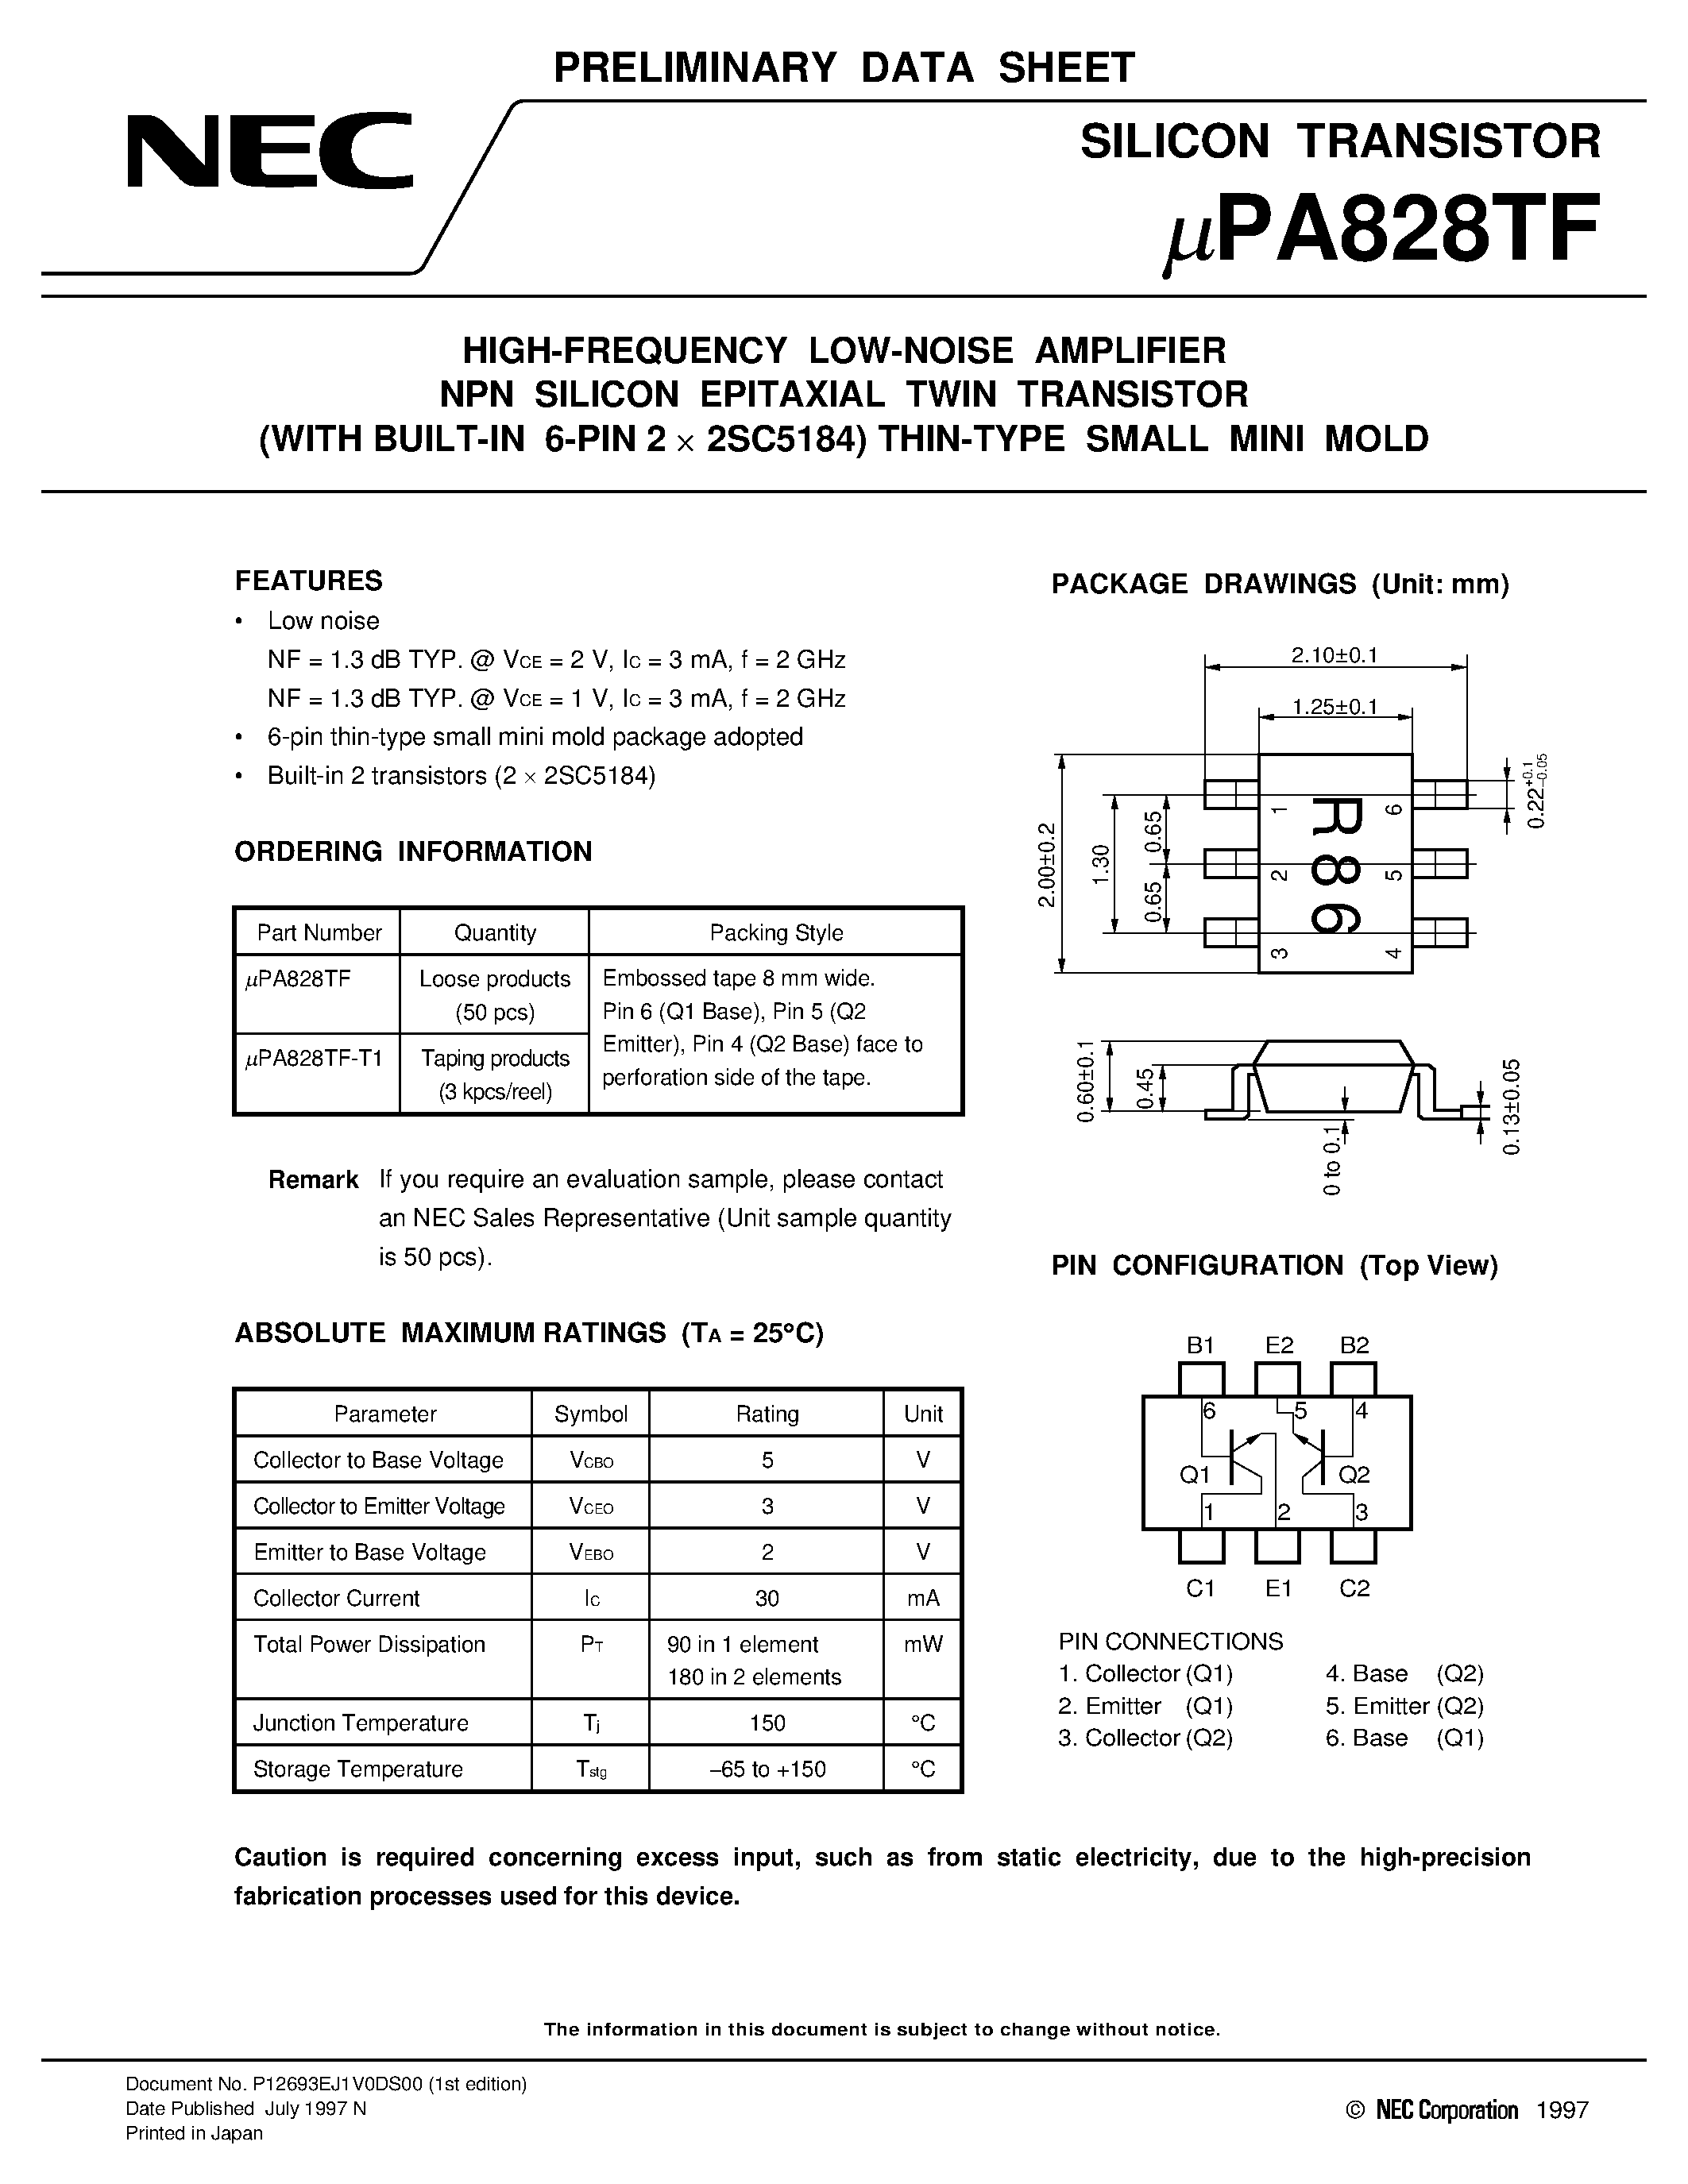 Datasheet UPA828TF - HIGH-FREQUENCY LOW-NOISE AMPLIFIER NPN SILICON EPITAXIAL TWIN TRANSISTOR WITH BUILT-IN 6-PIN 2 x 2SC5184 THIN-TYPE SMALL MINI MOLD page 1